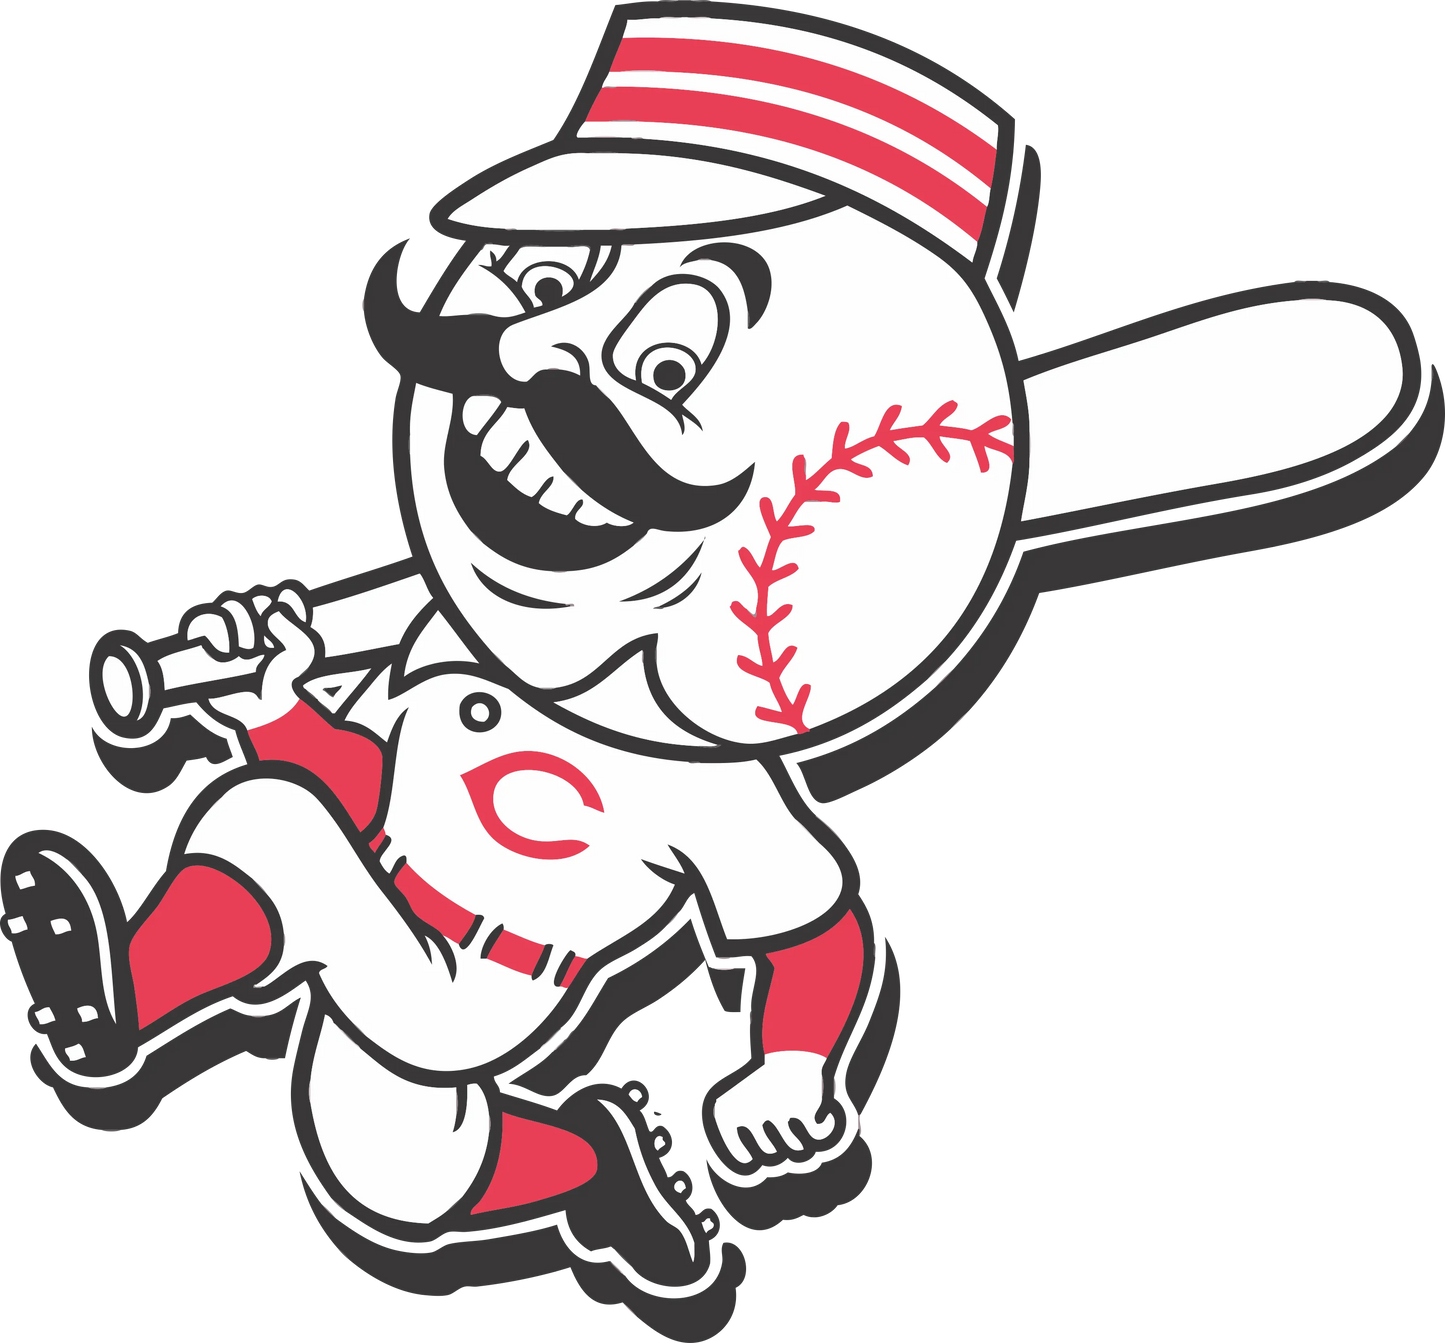 CR7 - Mr. Redlegs, DTF Transfer, Apparel & Accessories, Ace DTF